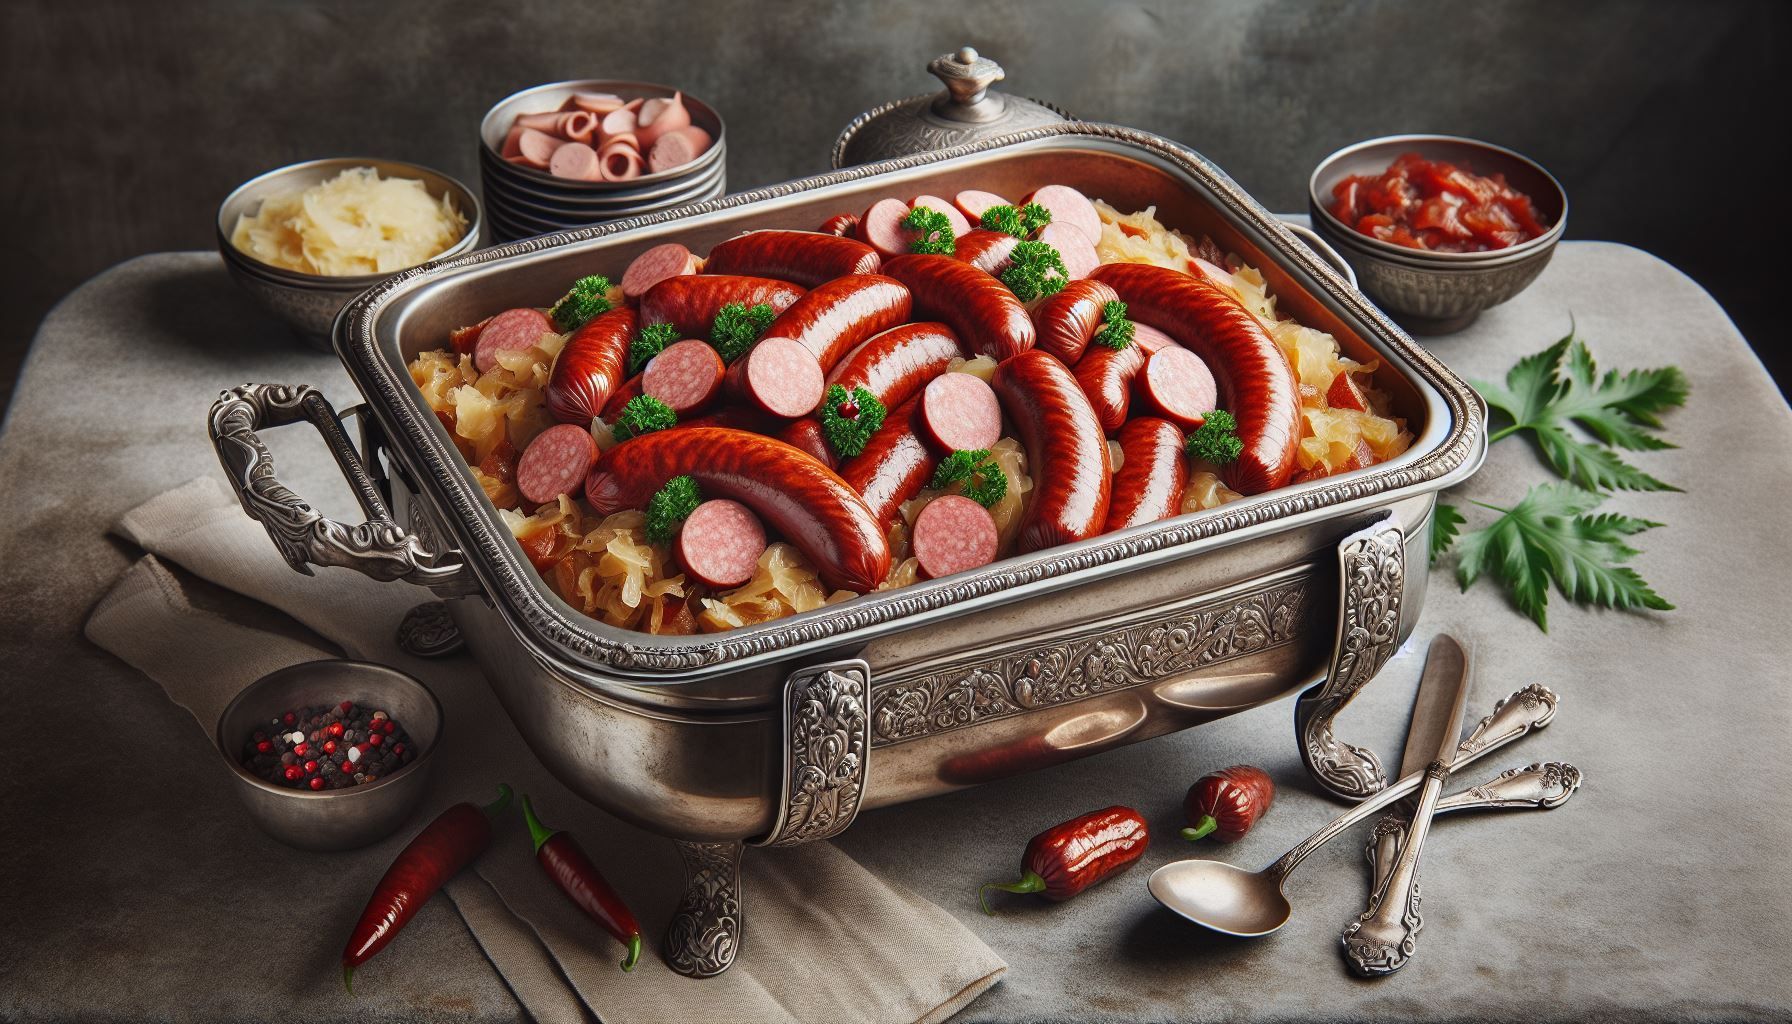 A casserole dish filled with sausages and cabbage on a table.